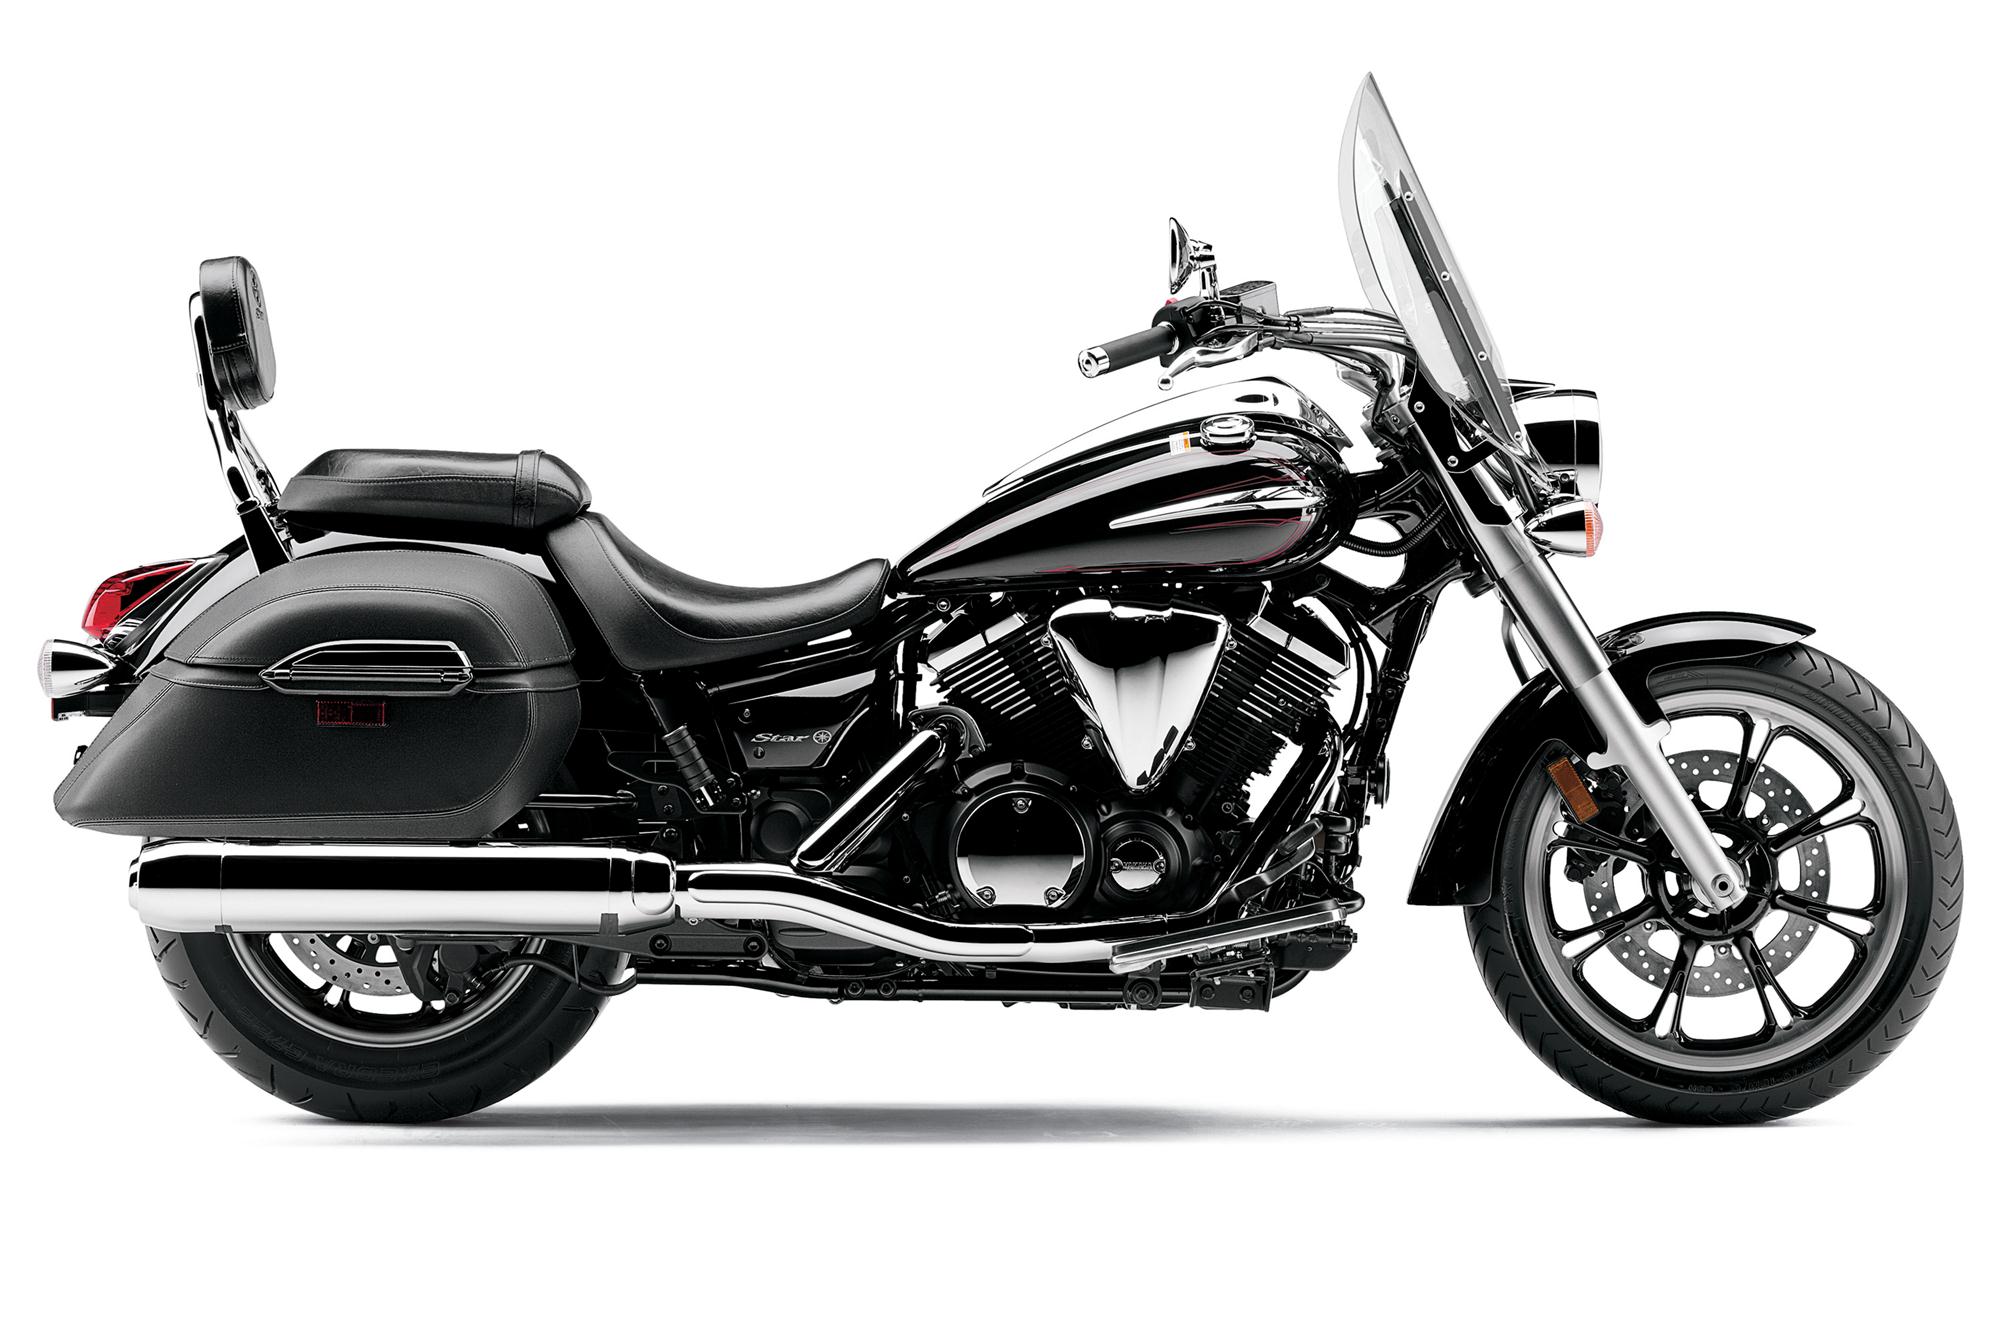 2013 V Star 950 Tourer The Feature Loaded Middleweight Traveling Bike Autoevolution